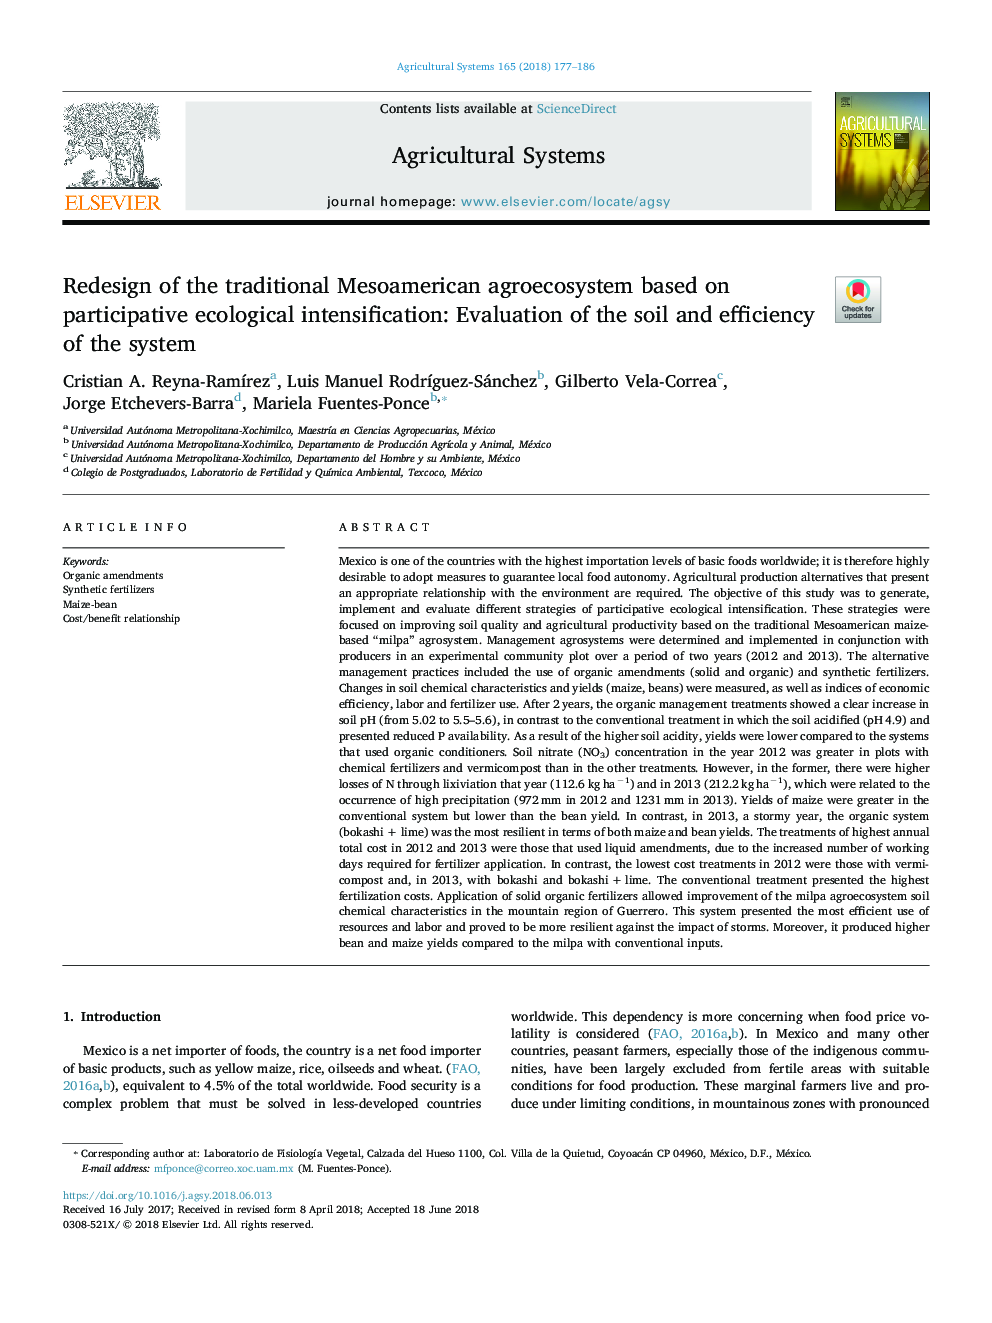 Redesign of the traditional Mesoamerican agroecosystem based on participative ecological intensification: Evaluation of the soil and efficiency of the system